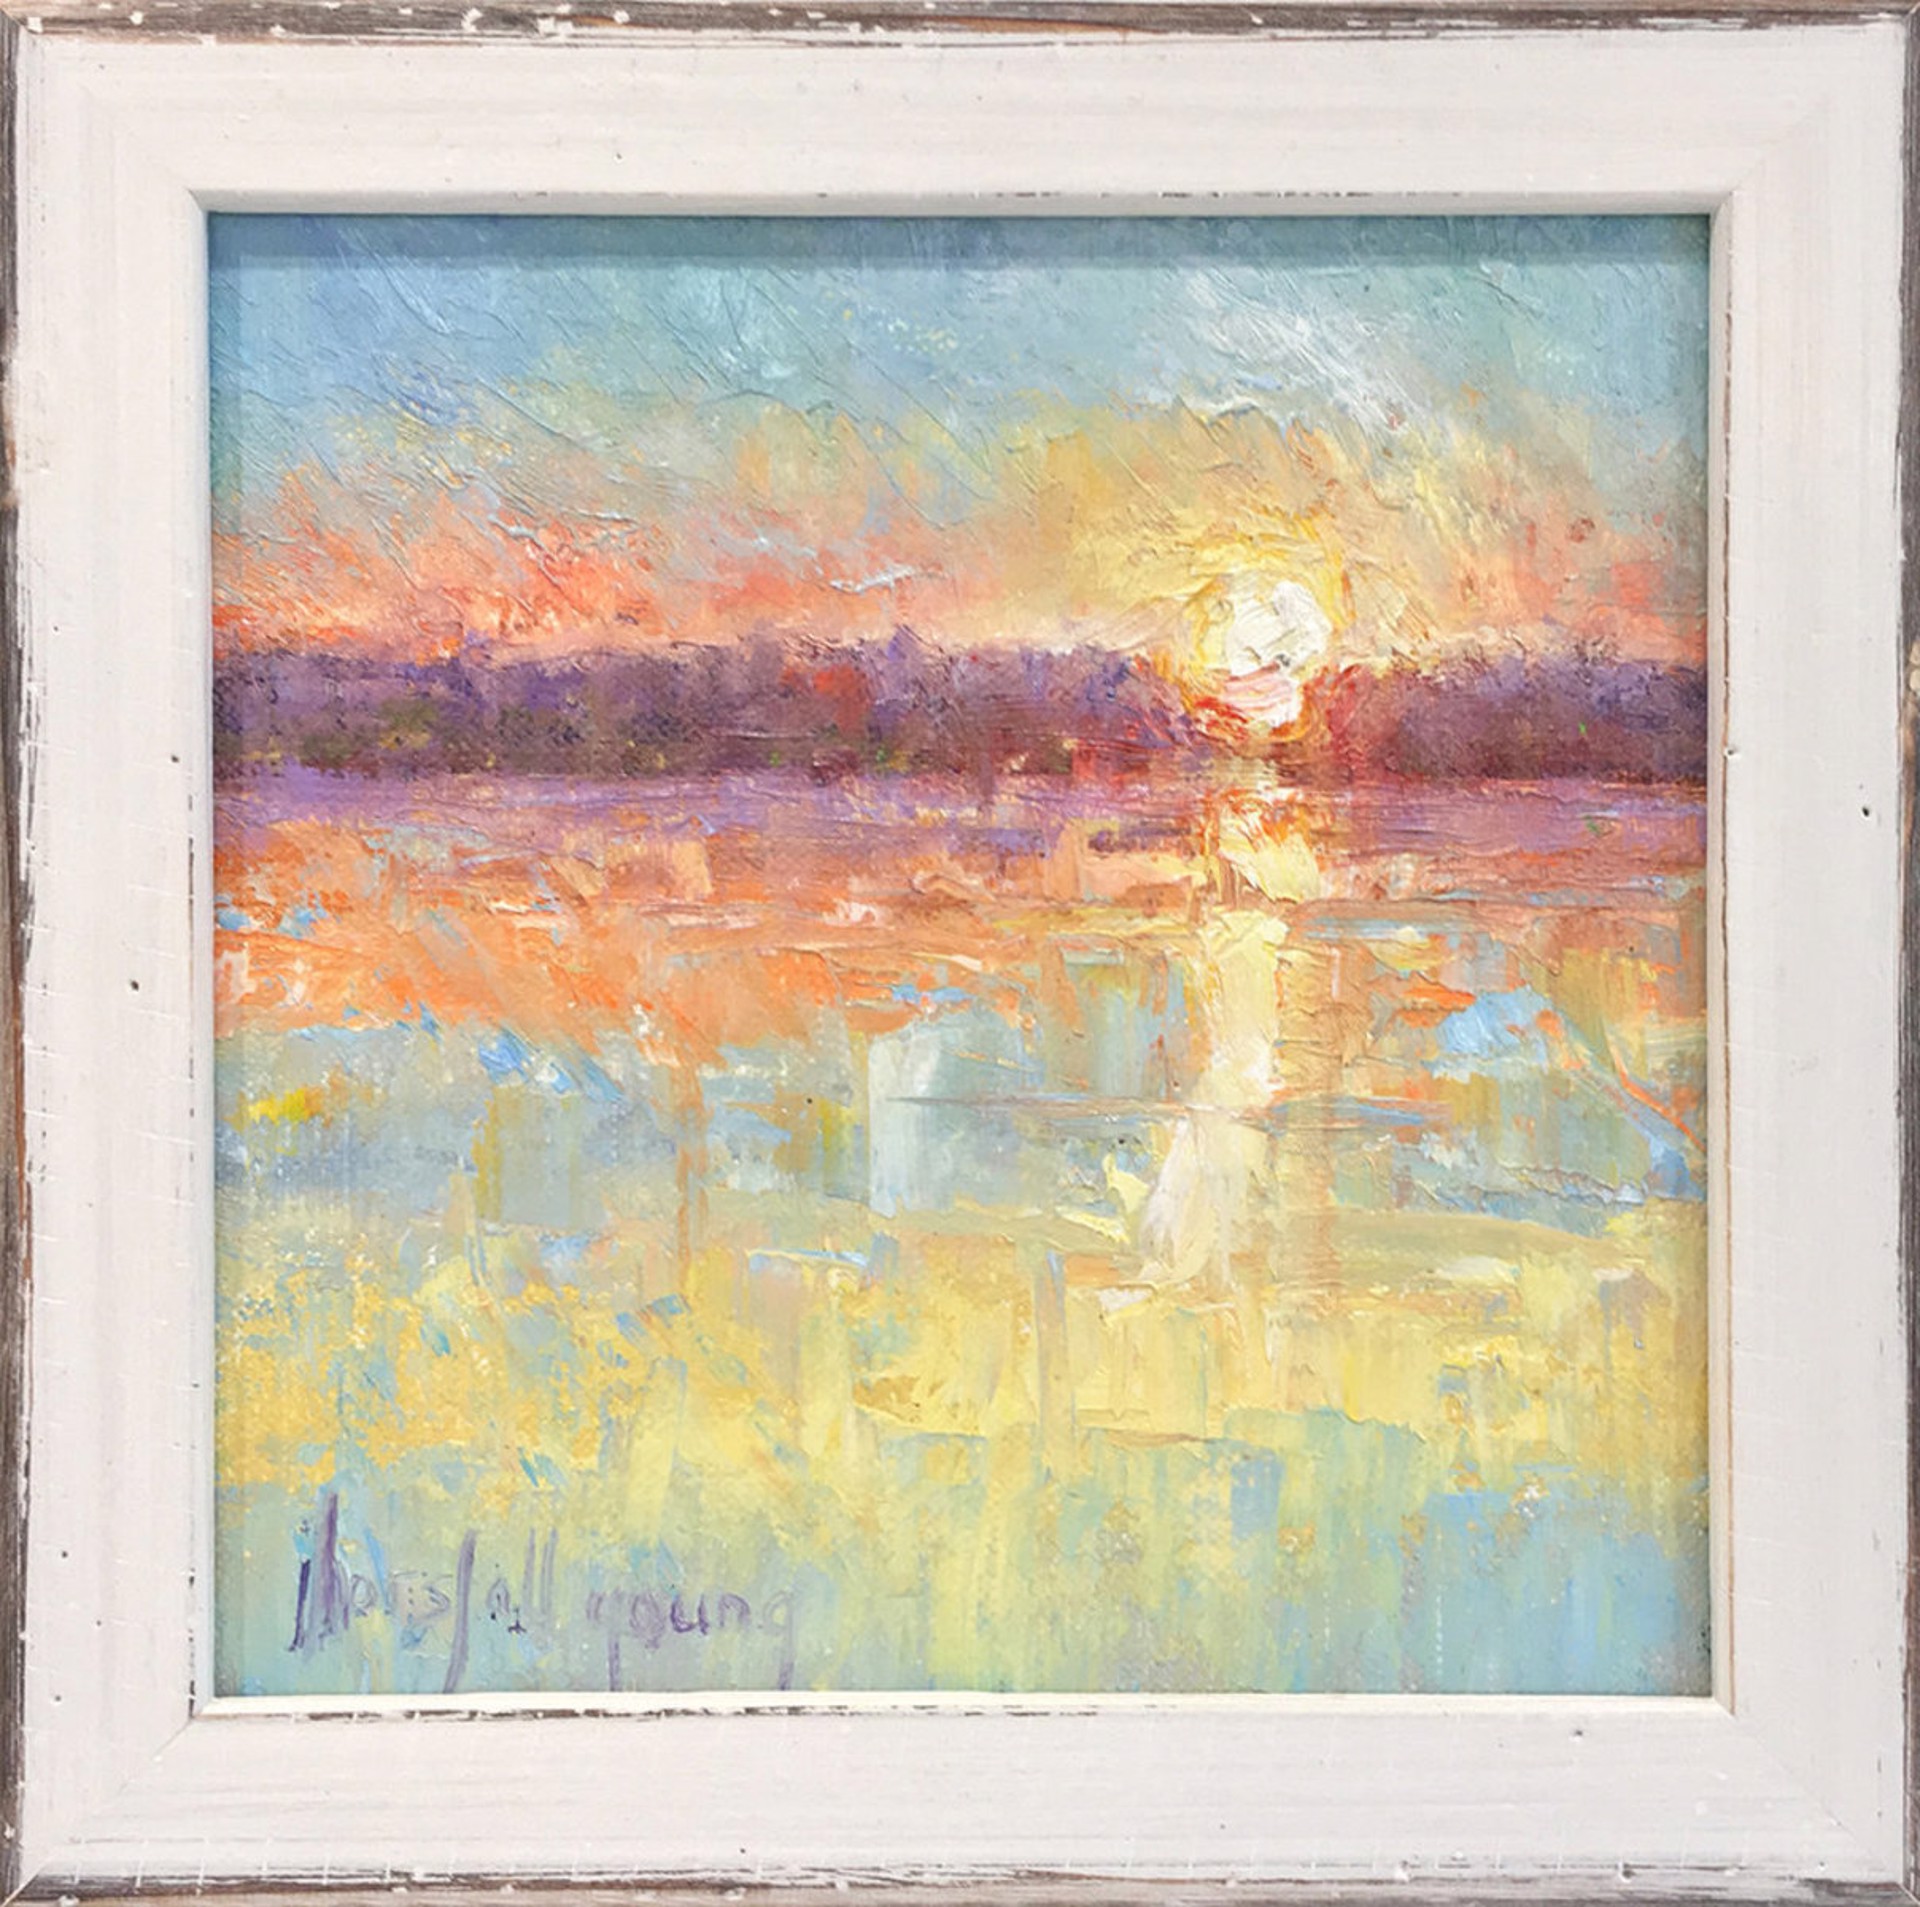 Bright Orange Sunset (L533) by Joan Horsfall Young